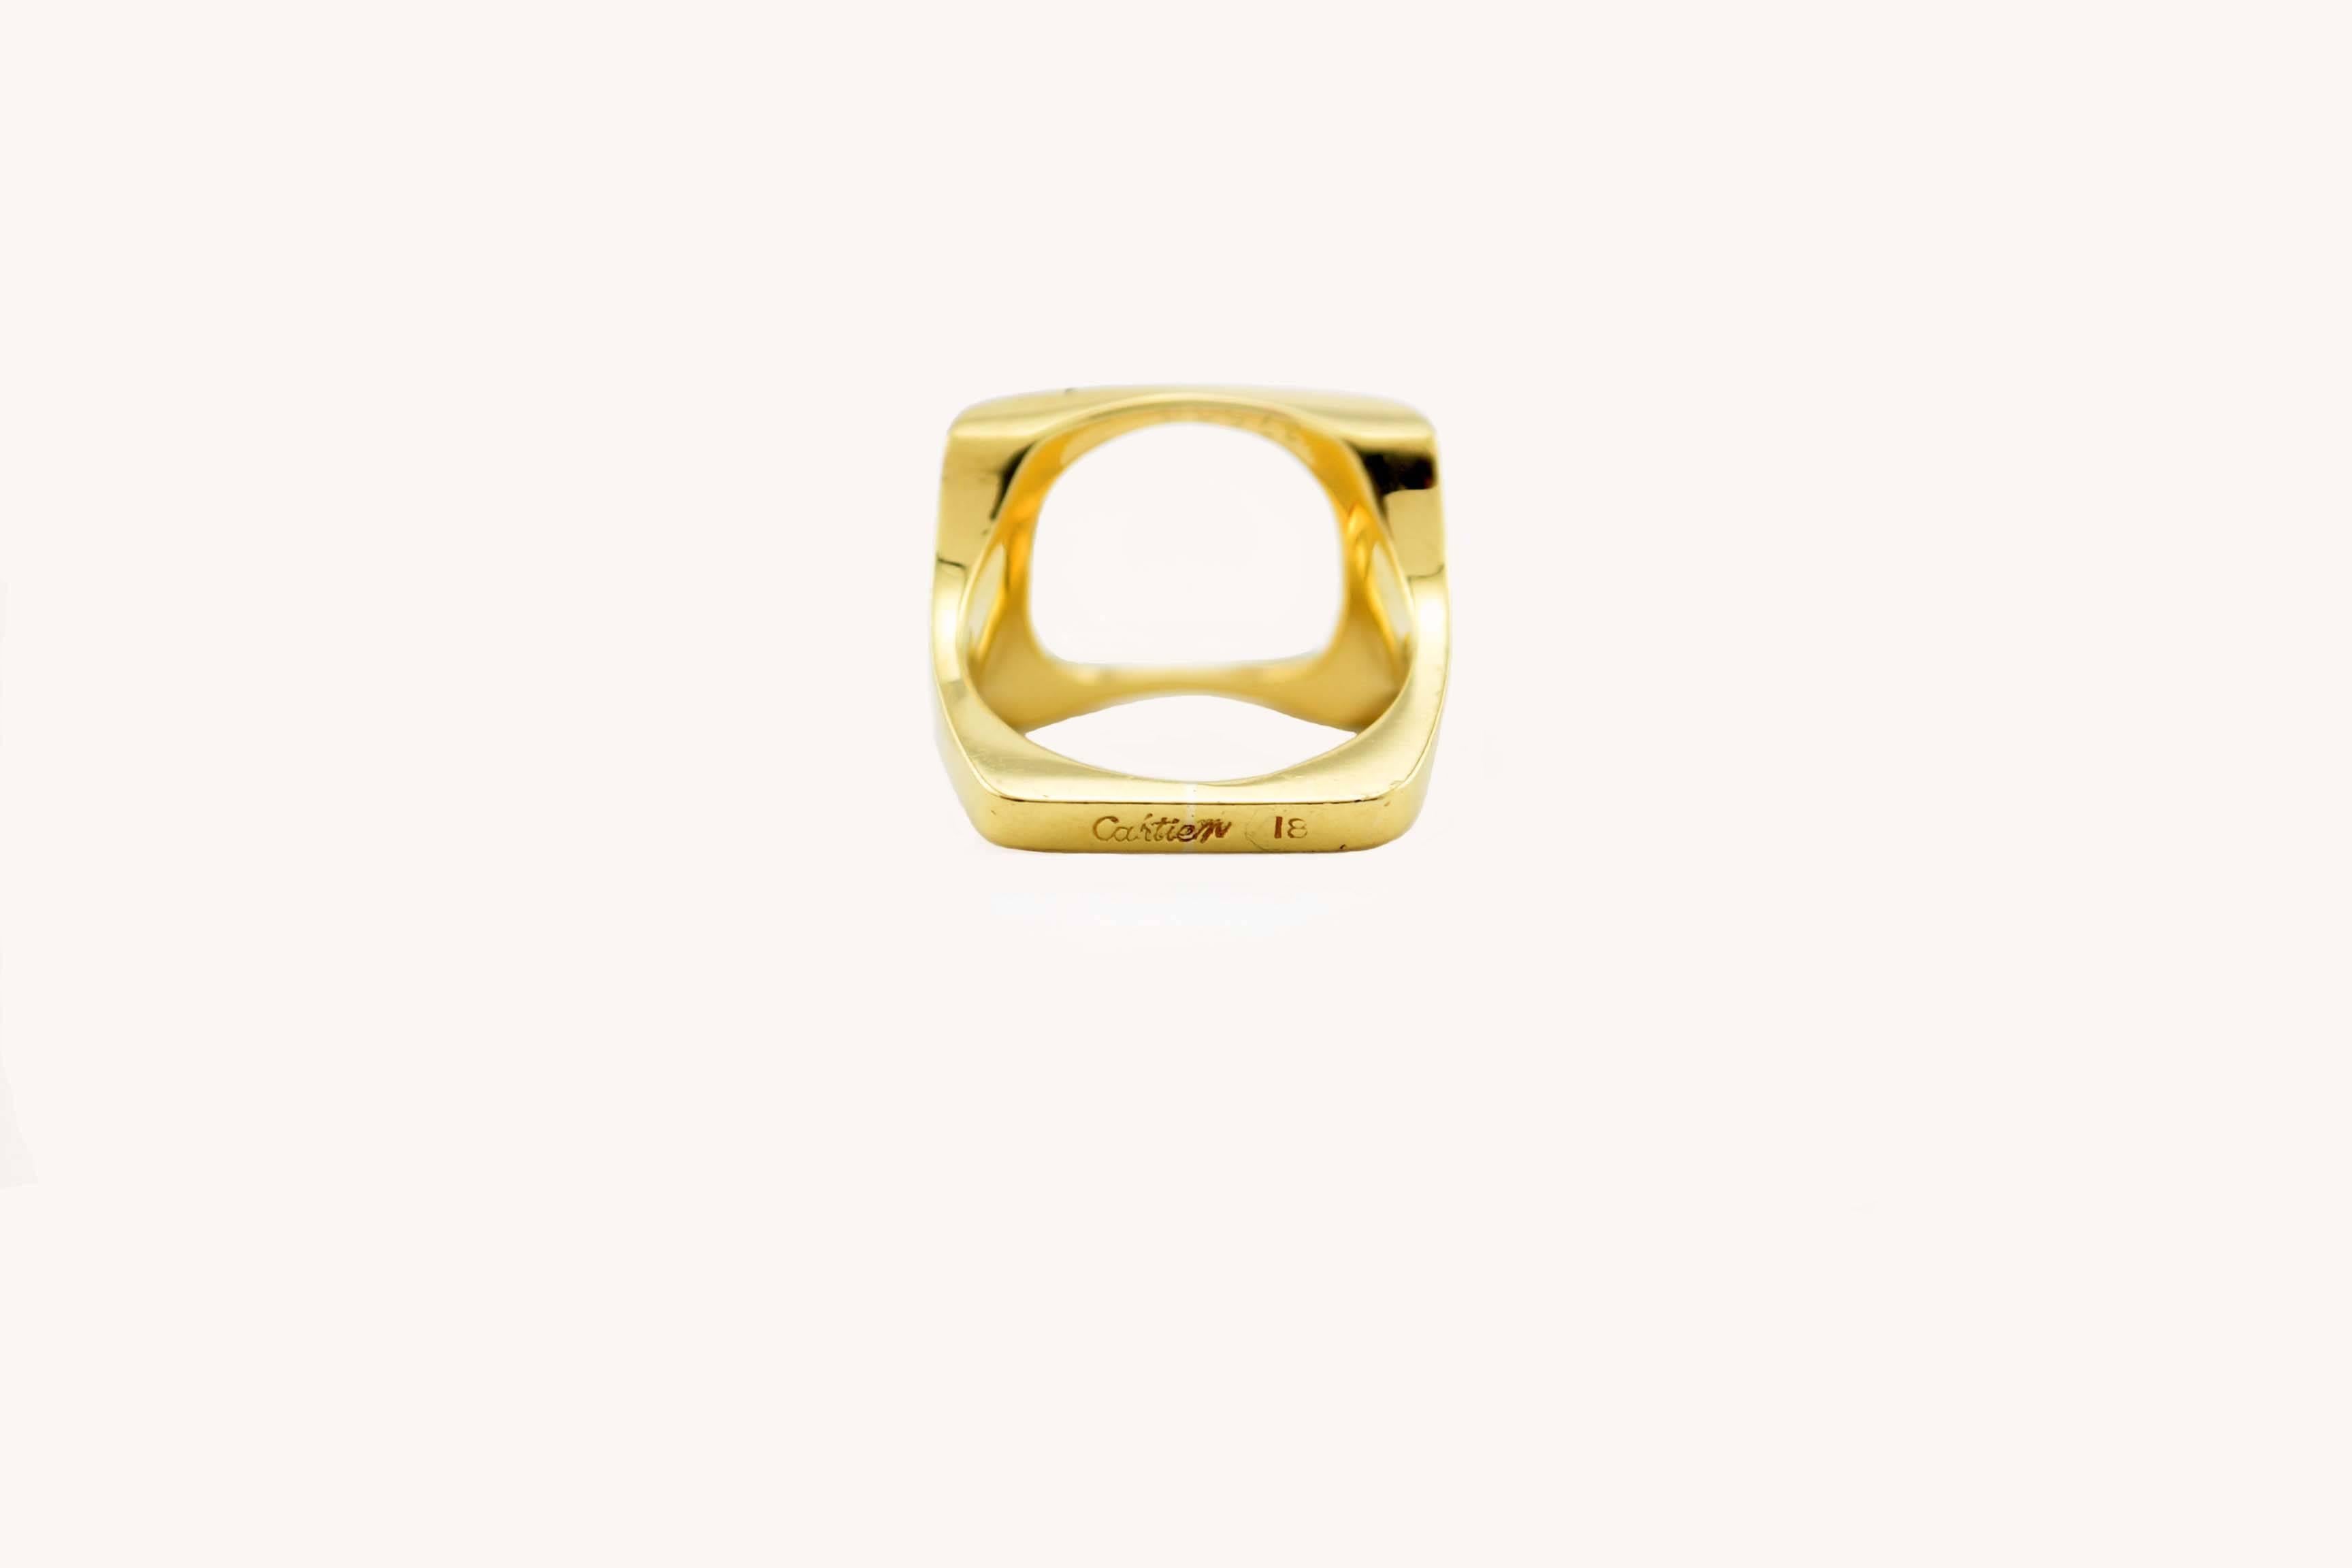 A very collectible Cartier Dinh Van circle in a square gold ring in 18 karat yellow, circa 1970.

The ring is approximately 0.55 inches in height.
Currently a US size 5.5 and not sizeable.